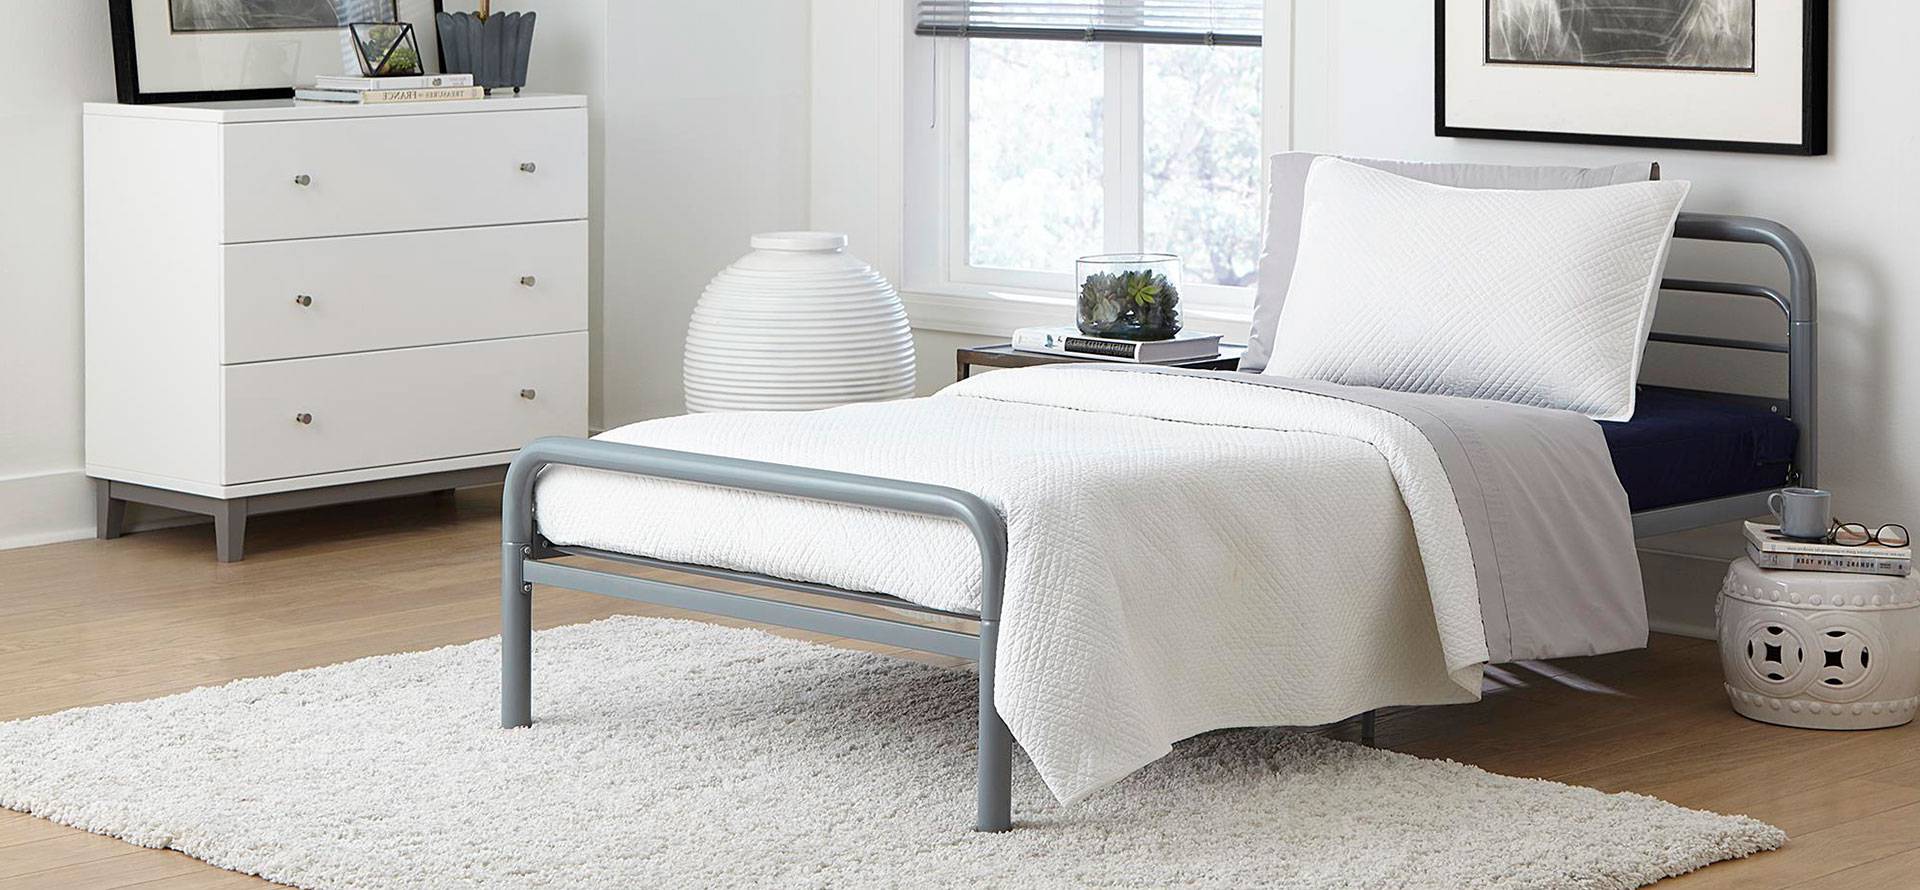 Twin size mattress on the bed frame.